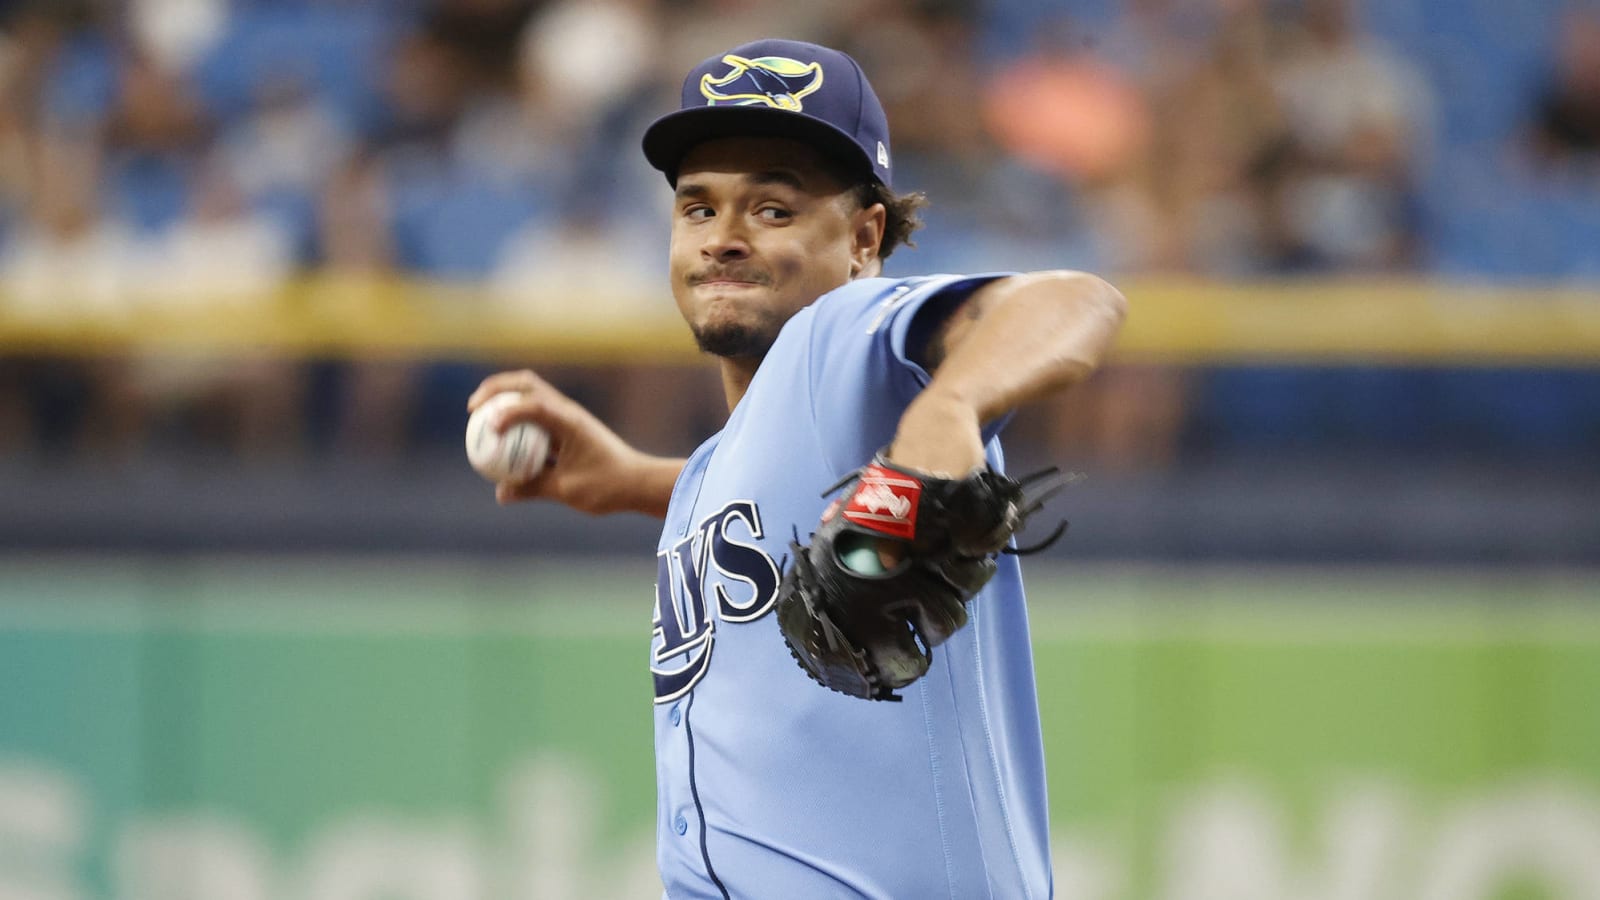 Chris Archer's return to Rays cut short by hip issue